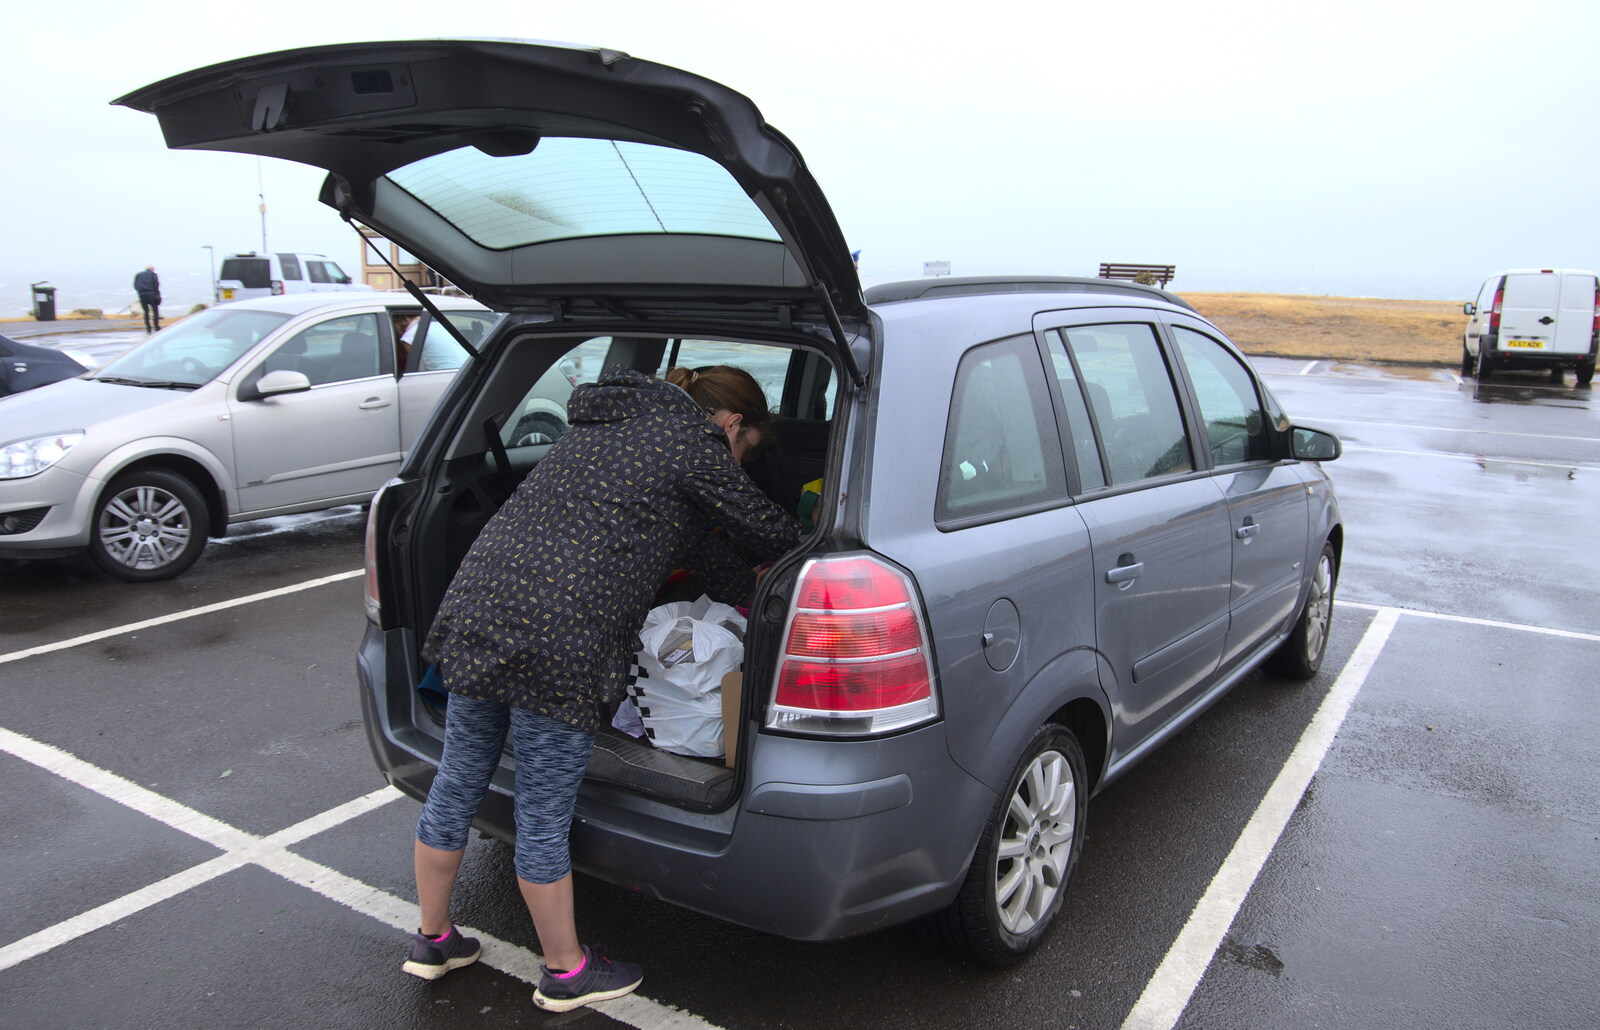 Isobel gets stuff out of the car boot from Blustery Beach Trips, Walkford and Highcliffe, Dorset - 29th July 2018